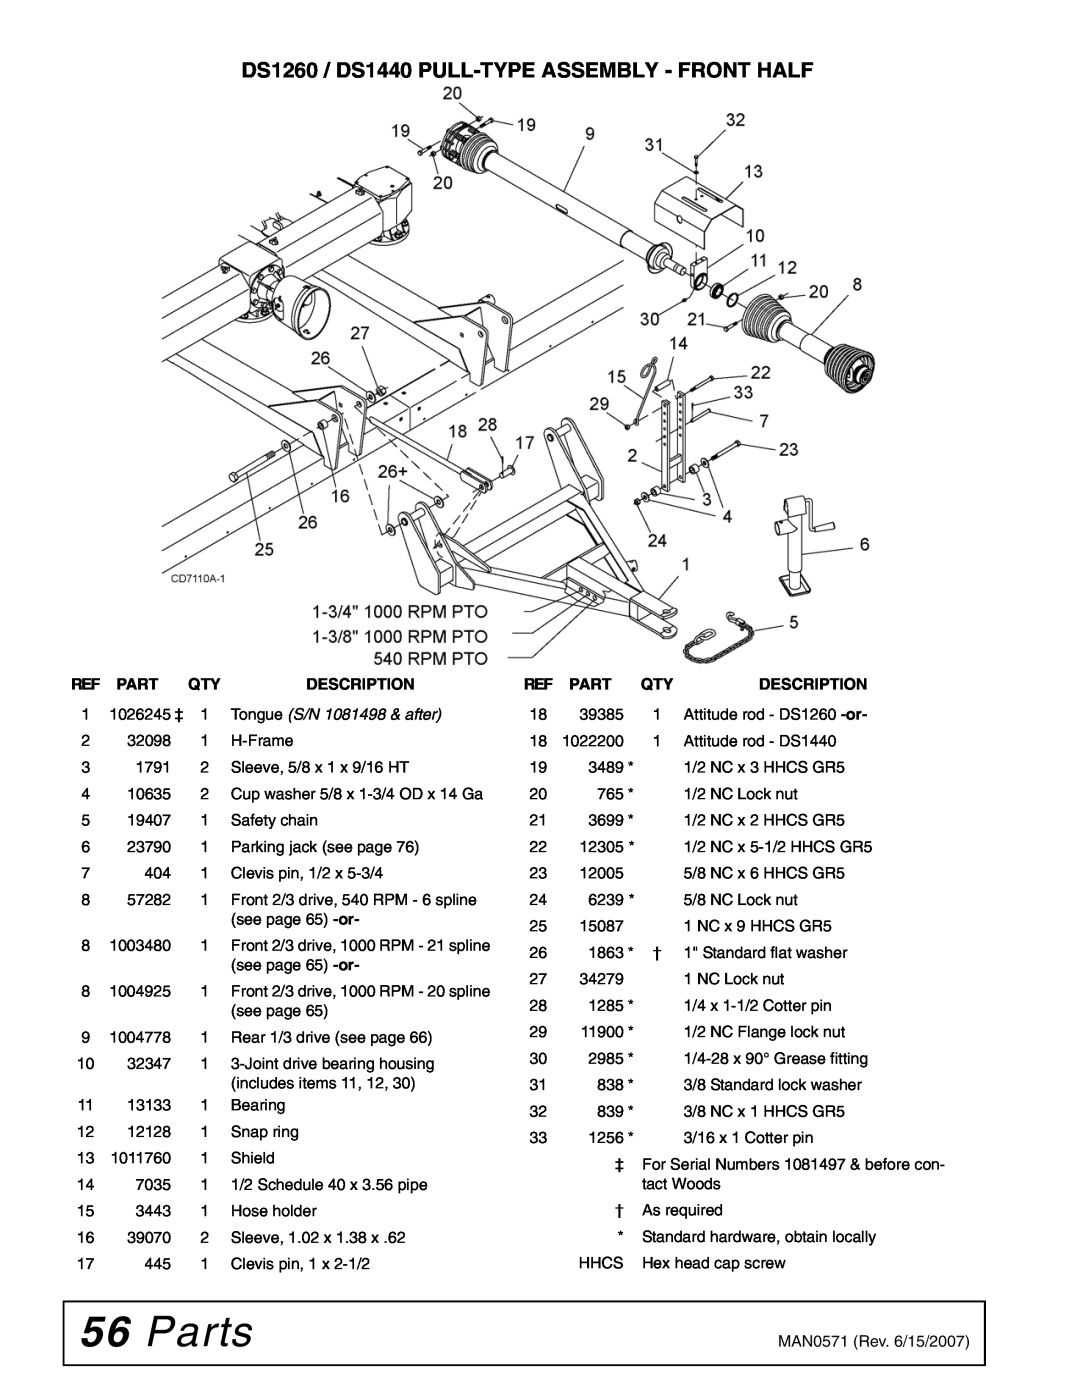 Woods Equipment manual Parts, DS1260 / DS1440 PULL-TYPE ASSEMBLY - FRONT HALF, Description, Tongue S/N 1081498 & after 